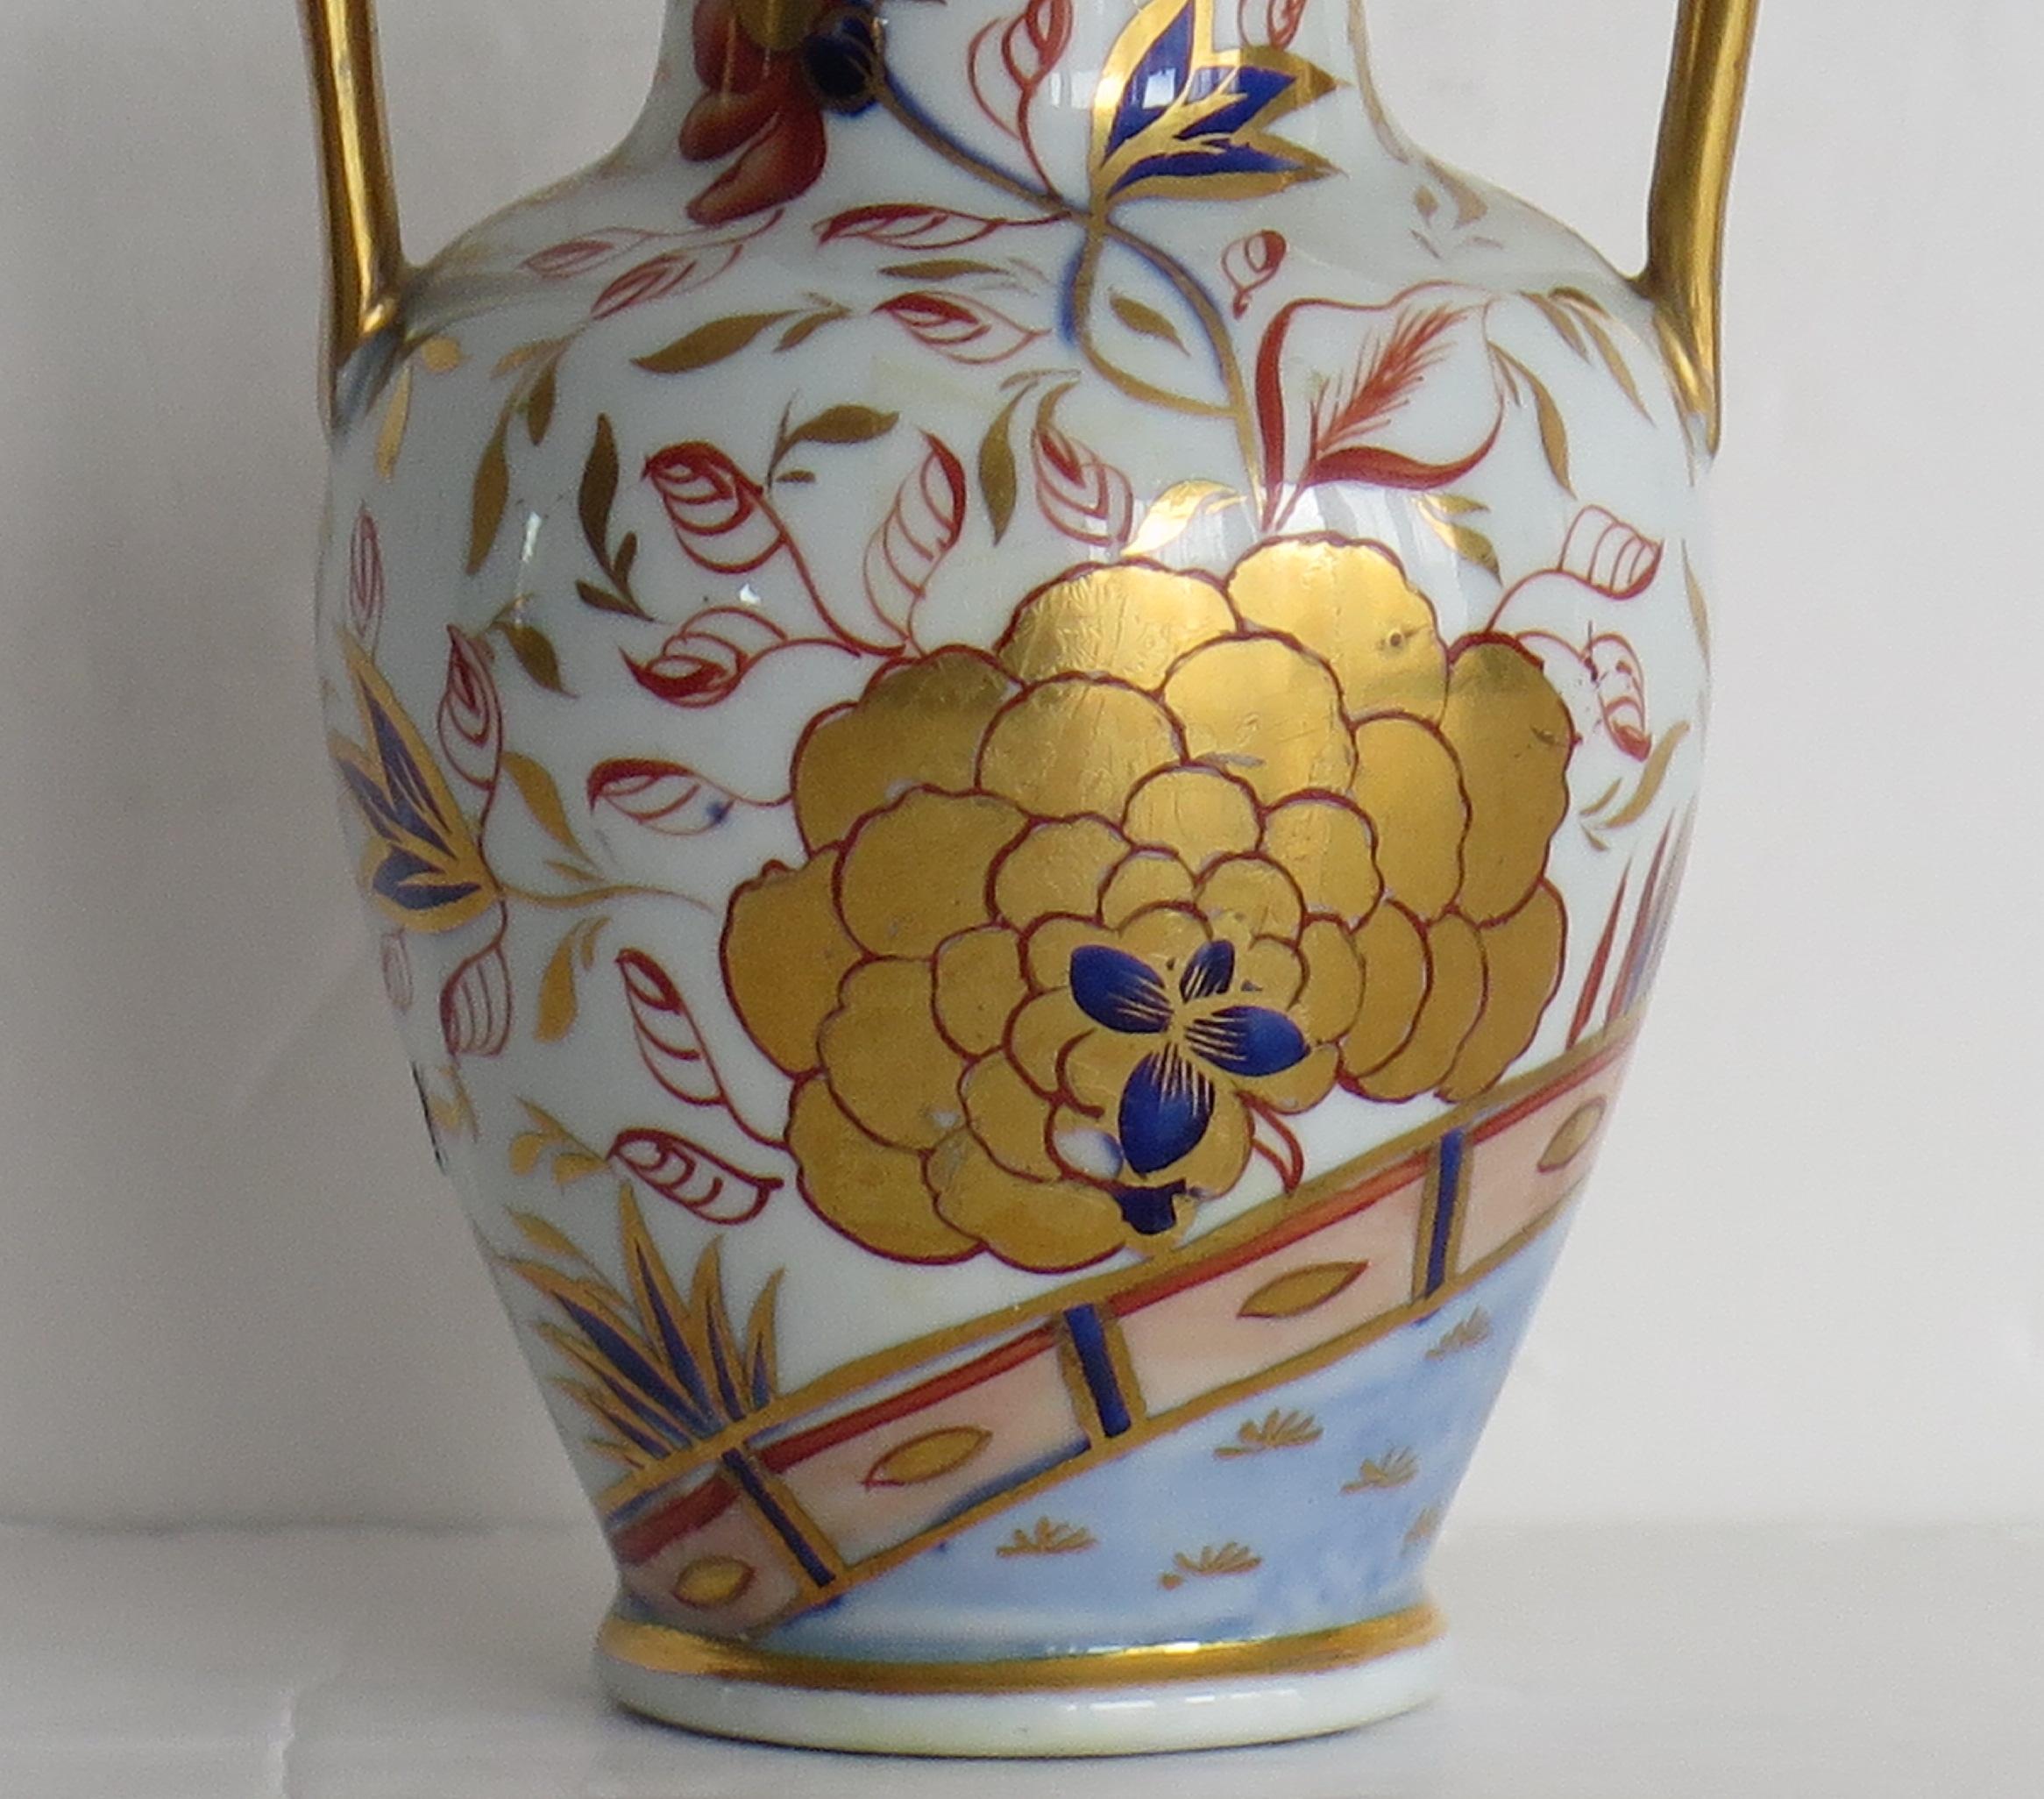 This is a rare miniature Mason's ironstone Lidded Urn or Vase in the beautiful Gold Rose Japan pattern, which we date to circa 1820.

Miniature or toy items of Masons ironstone are hard to find today.

This piece is well potted as a baluster